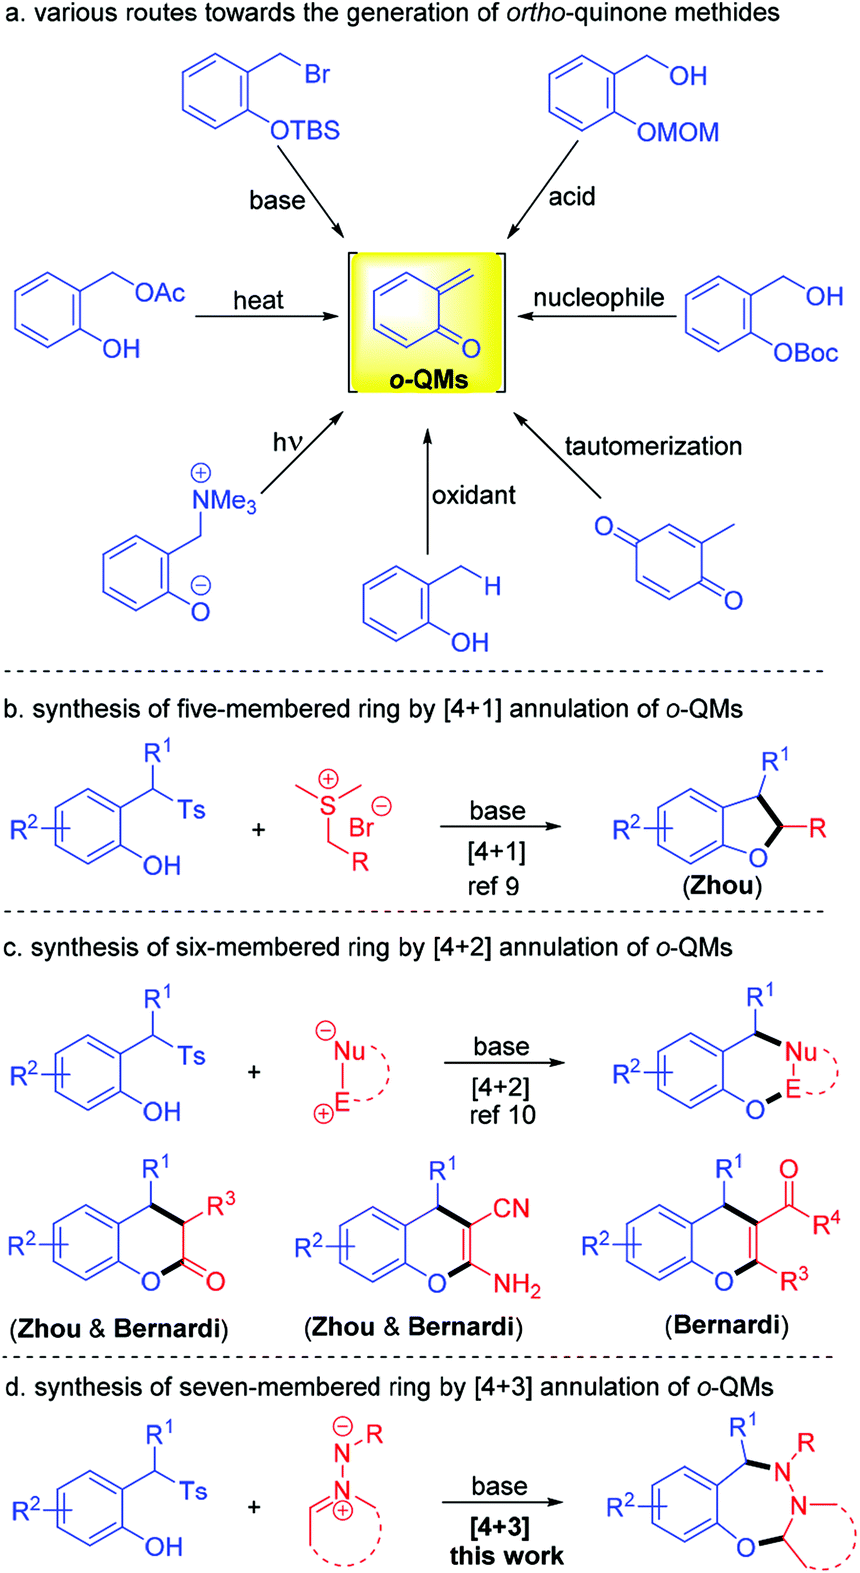 Base Mediated Diastereoselective 4 3 Annulation Of In Situ Generated Ortho Quinone Methides With C N Cyclic Azomethine Imines Organic Biomolecular Chemistry Rsc Publishing